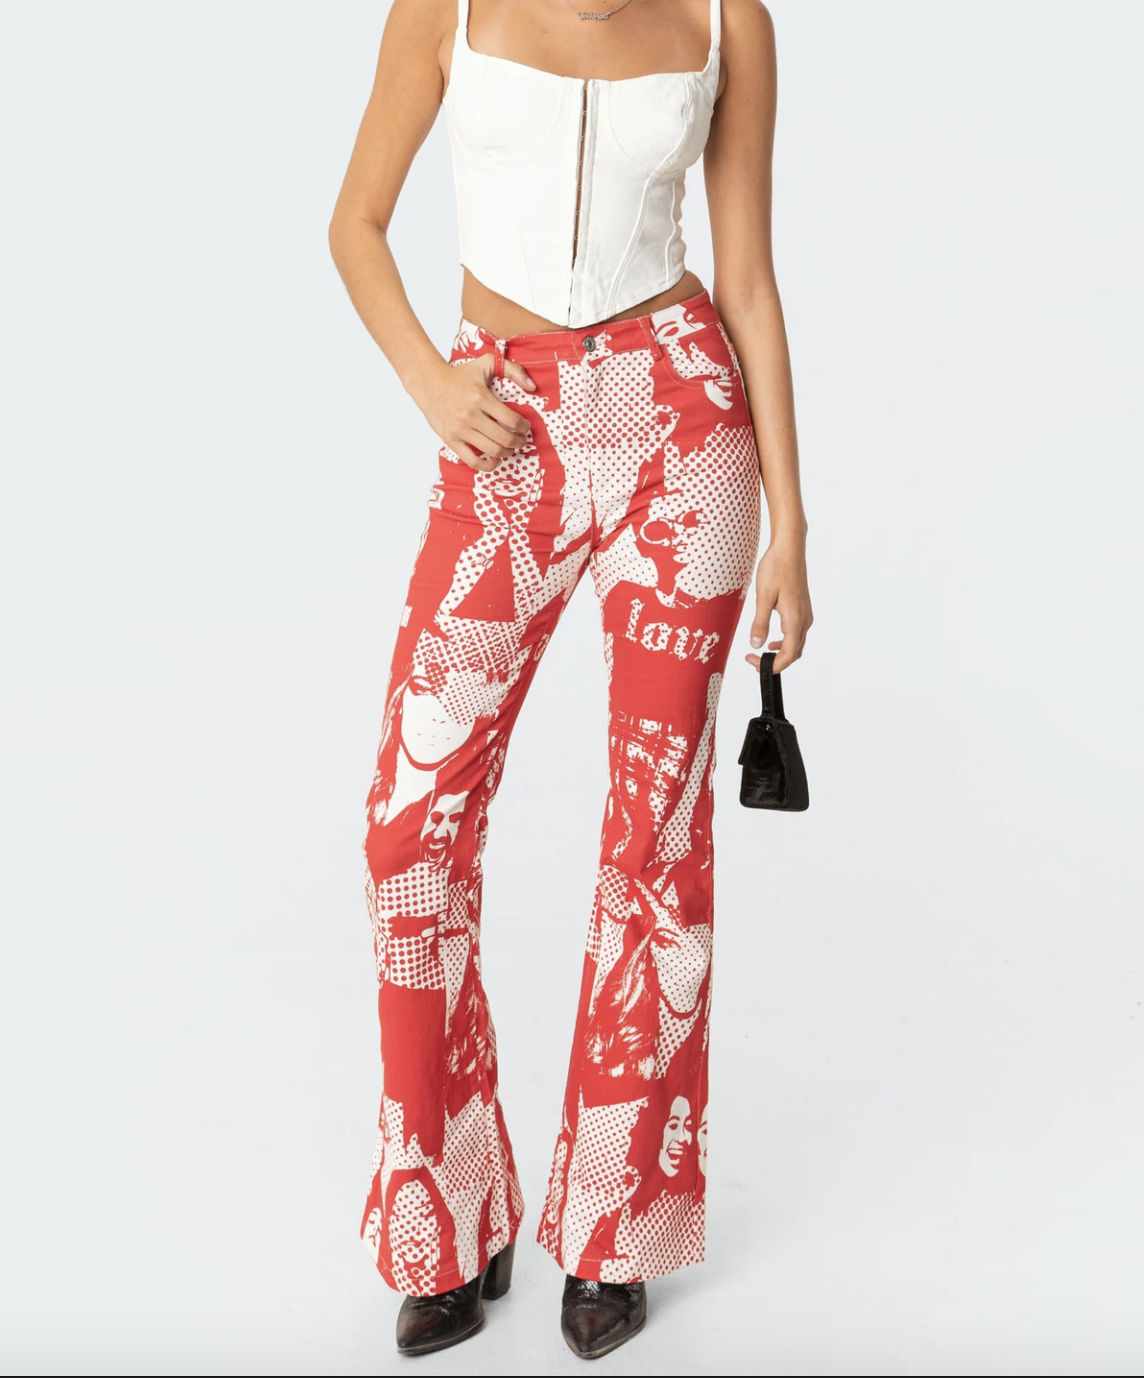 Reliance Trends  Official  Print clash this cool floral shirt with some  geometric printed trousers to nail the floral trend A pair of sporty shoes  will make this look perfect  Facebook